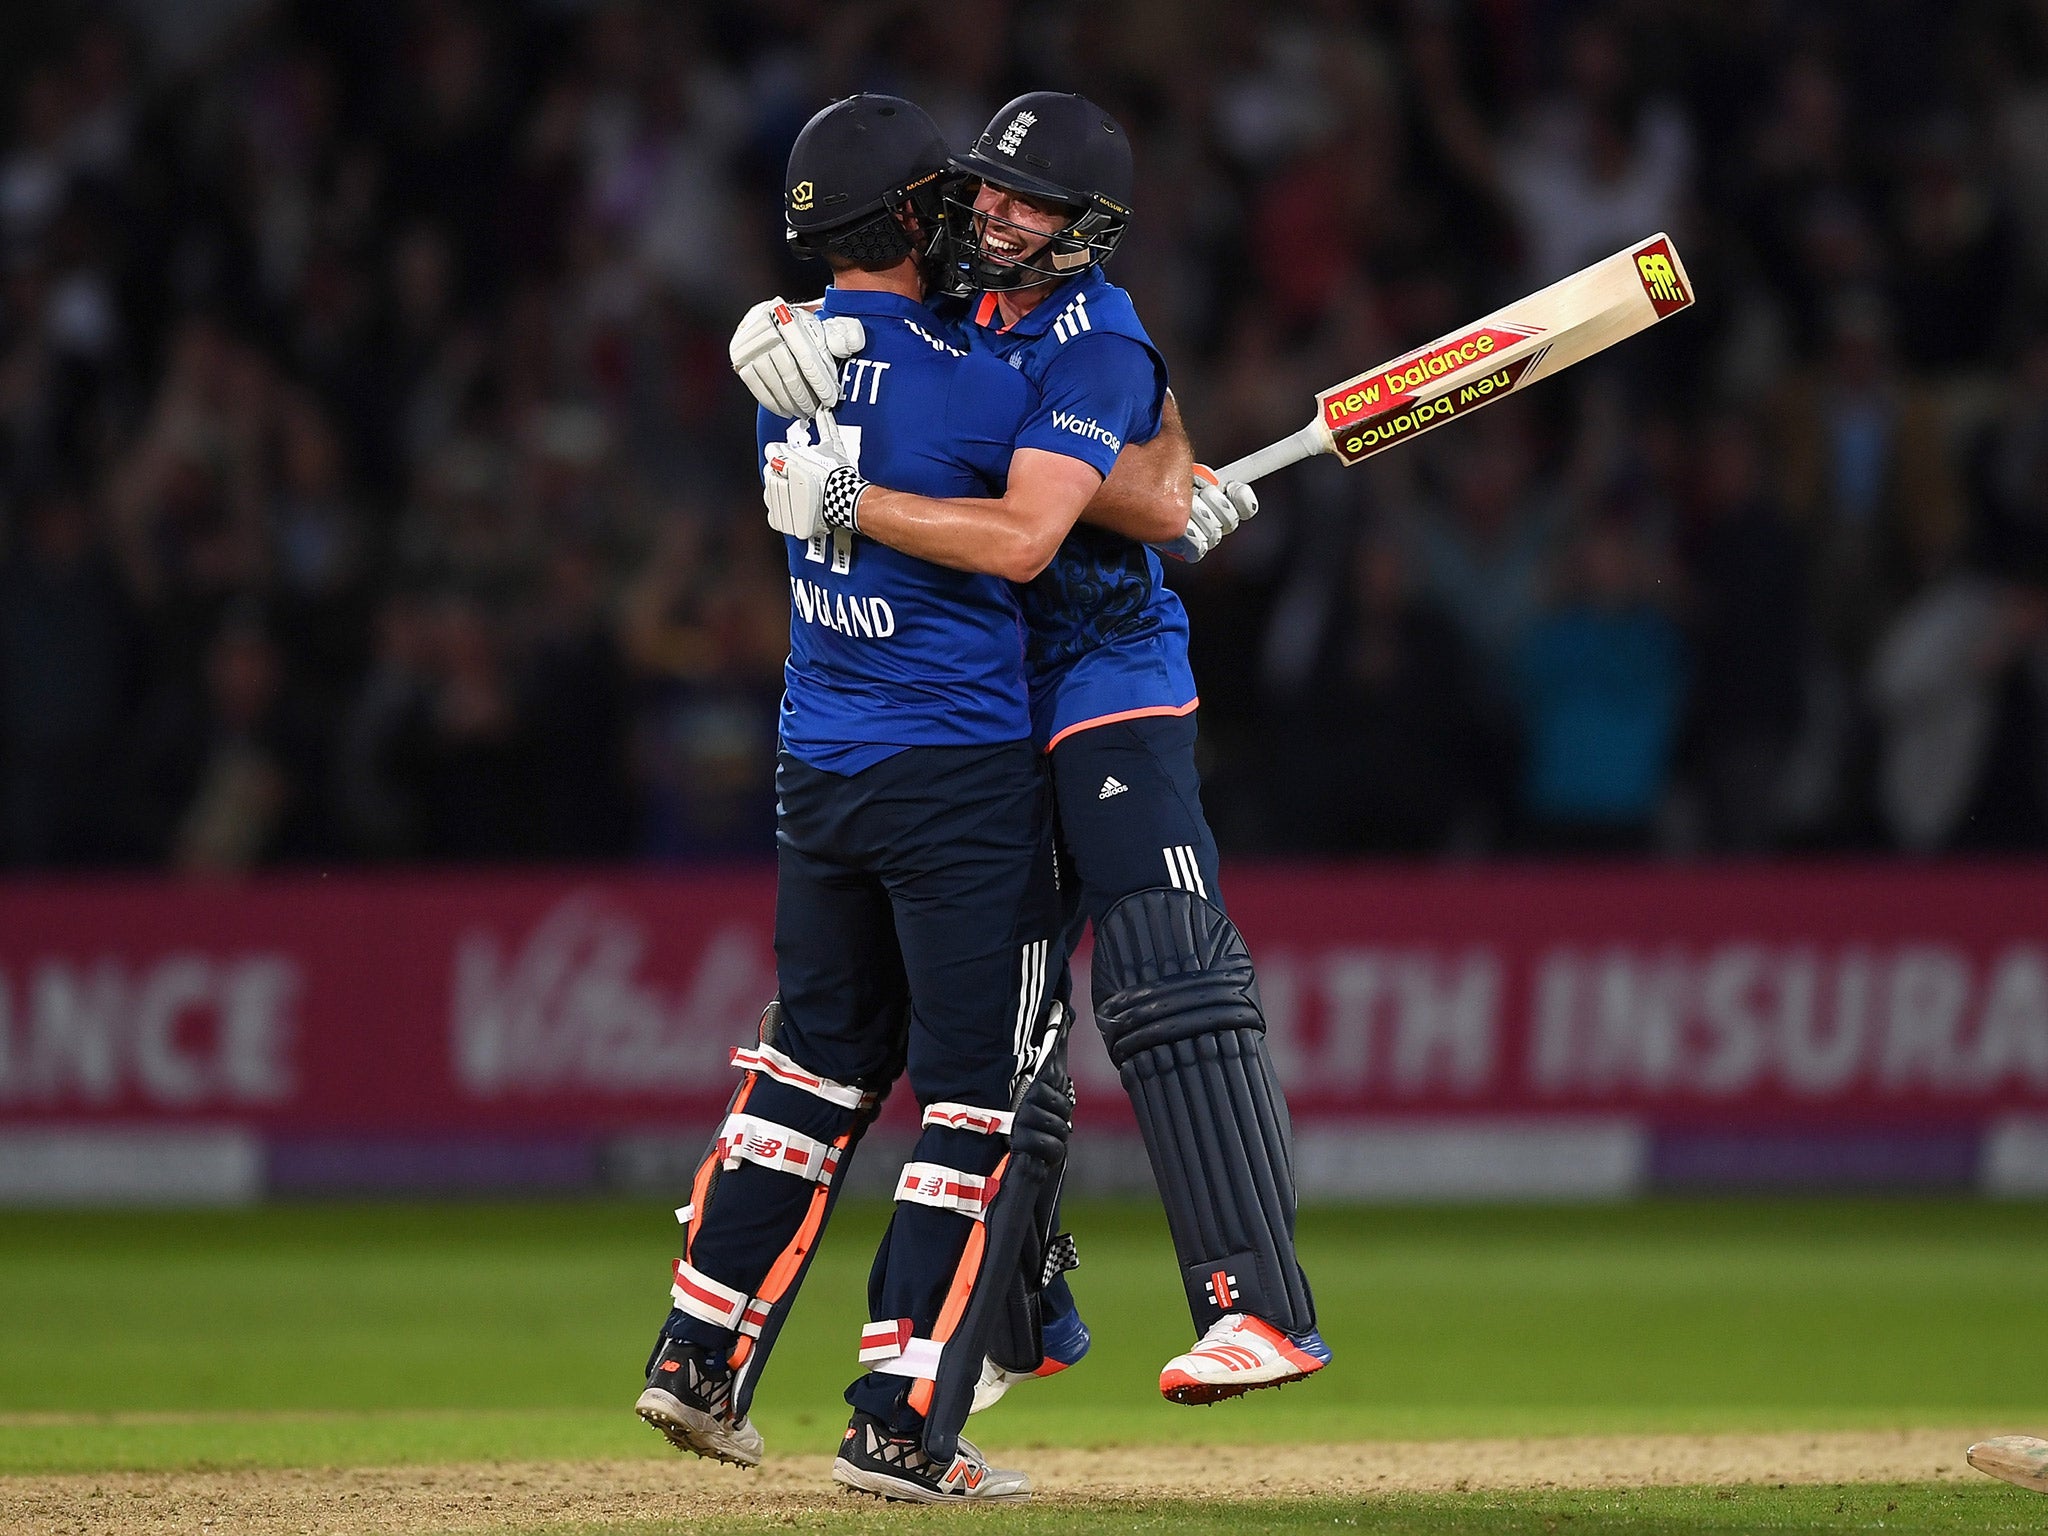 Liam Plunkett and Chris Woakes celebrate after the latter's six secured a tie (Getty)